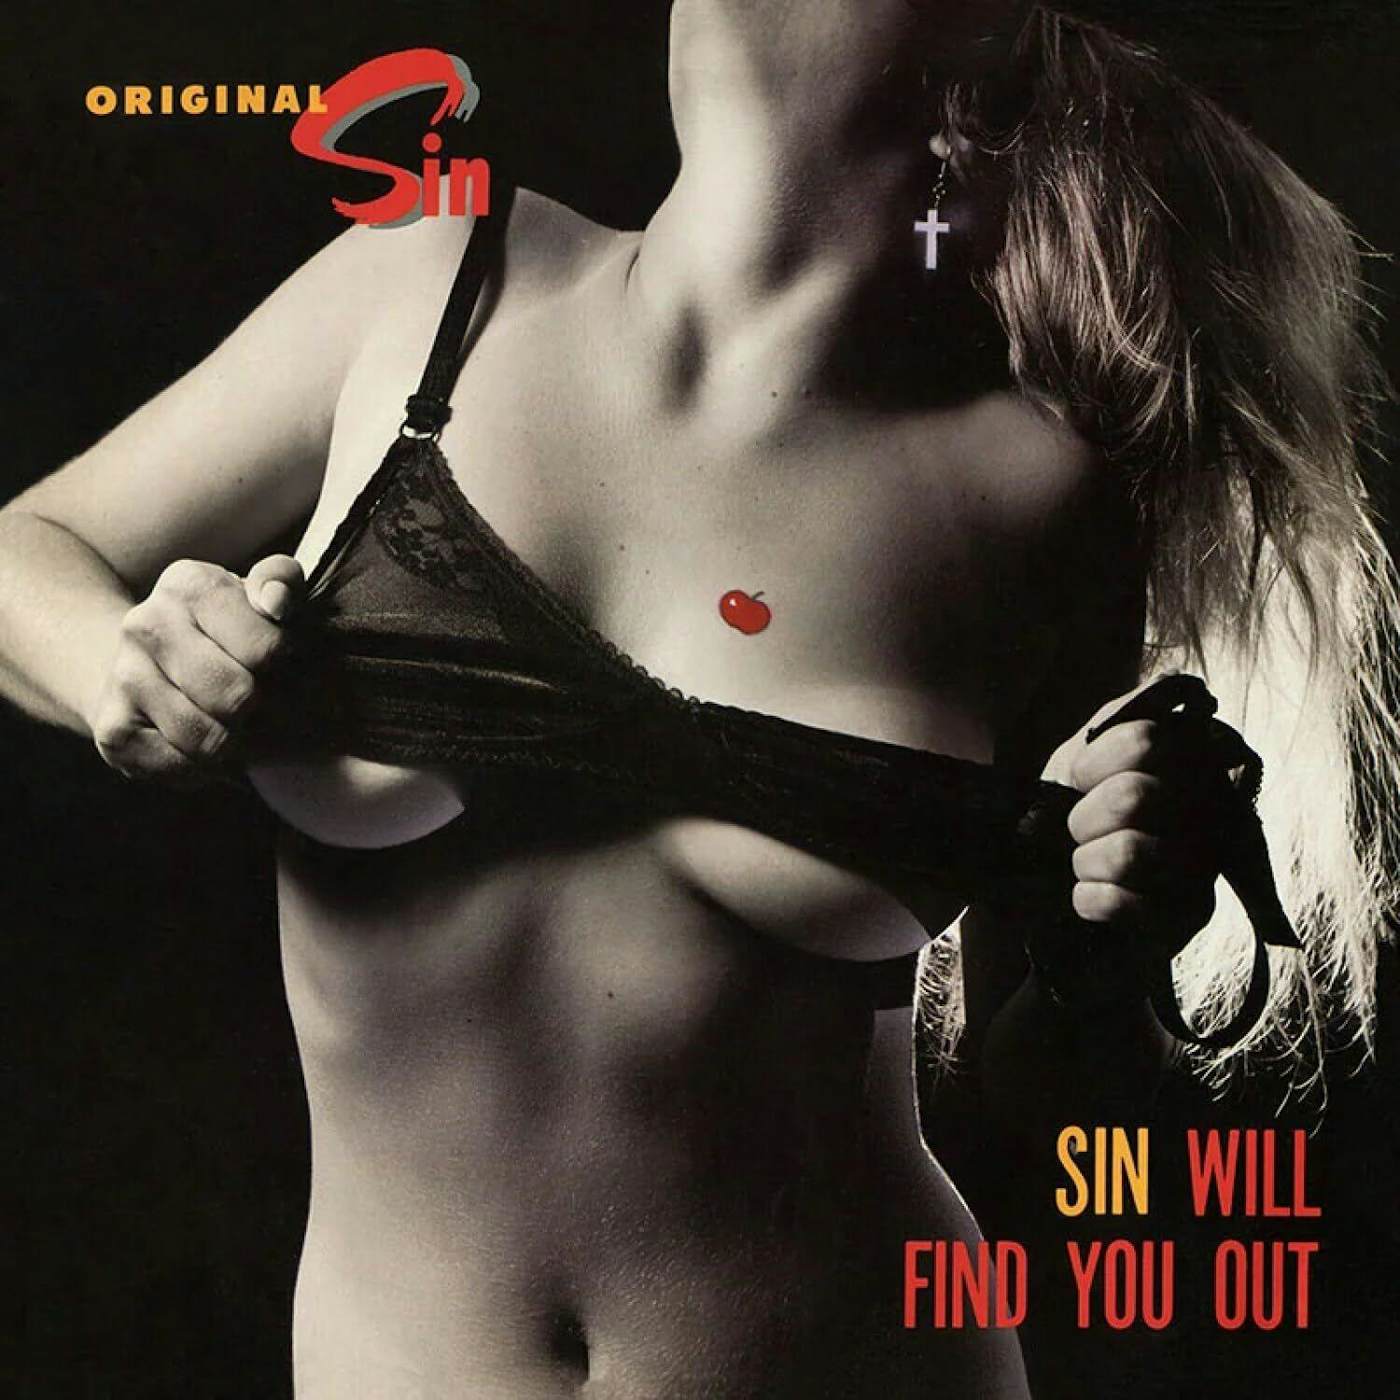 Original Sin Sin Will Find You Out (Coloured) Vinyl Record